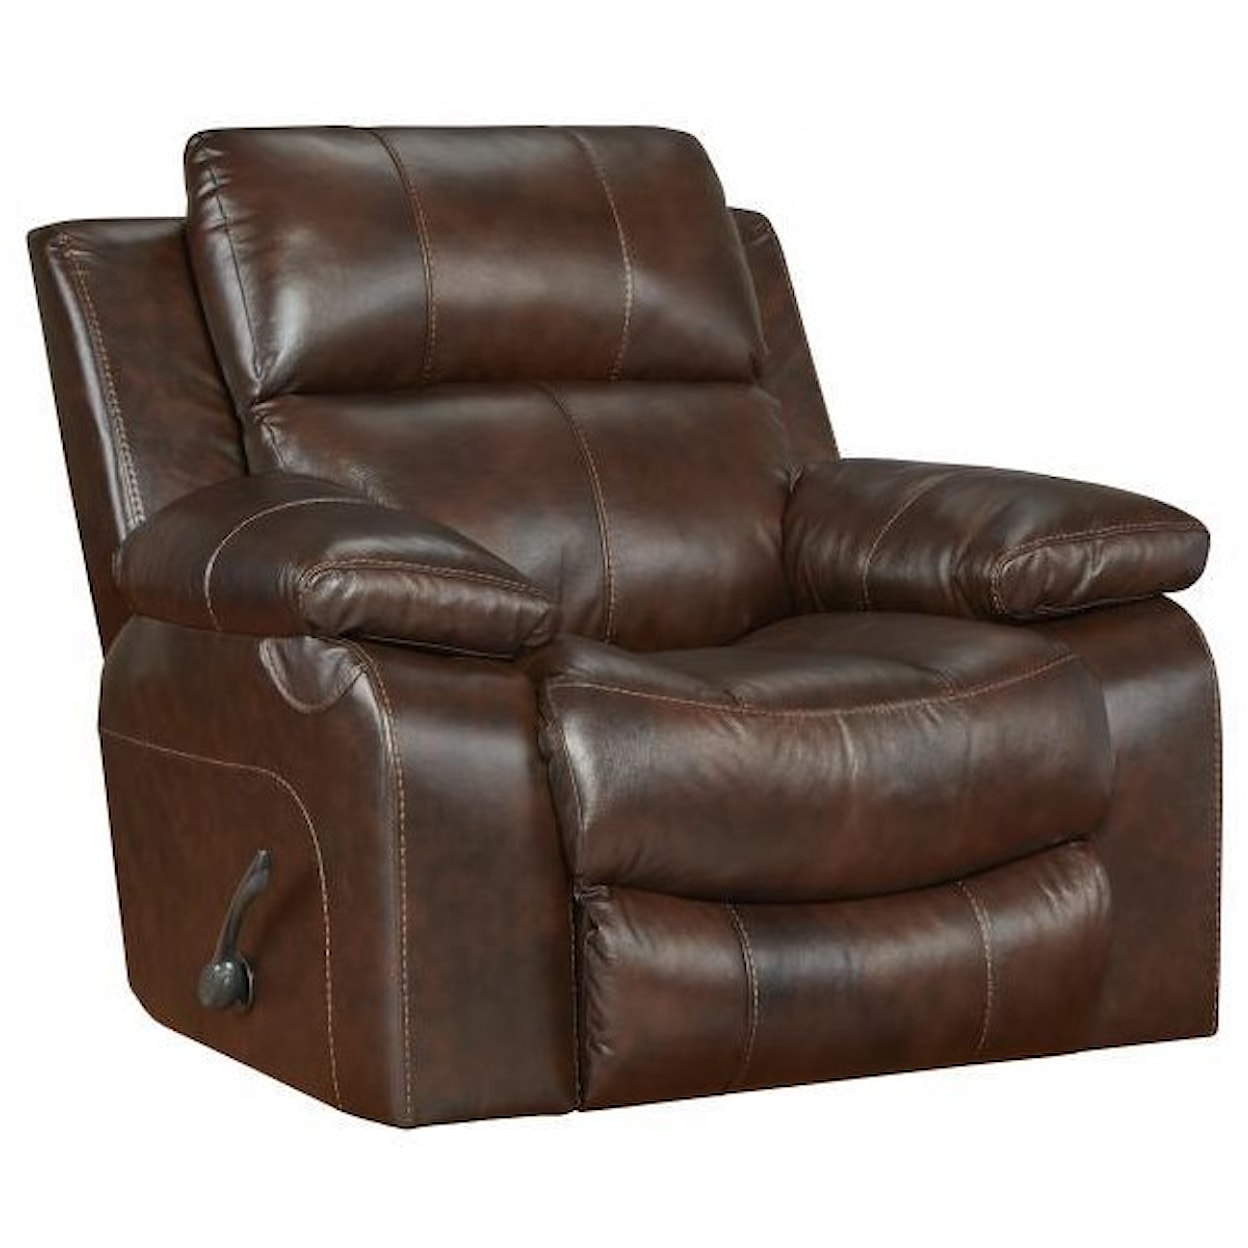 Catnapper 499 Power Leather Recliner